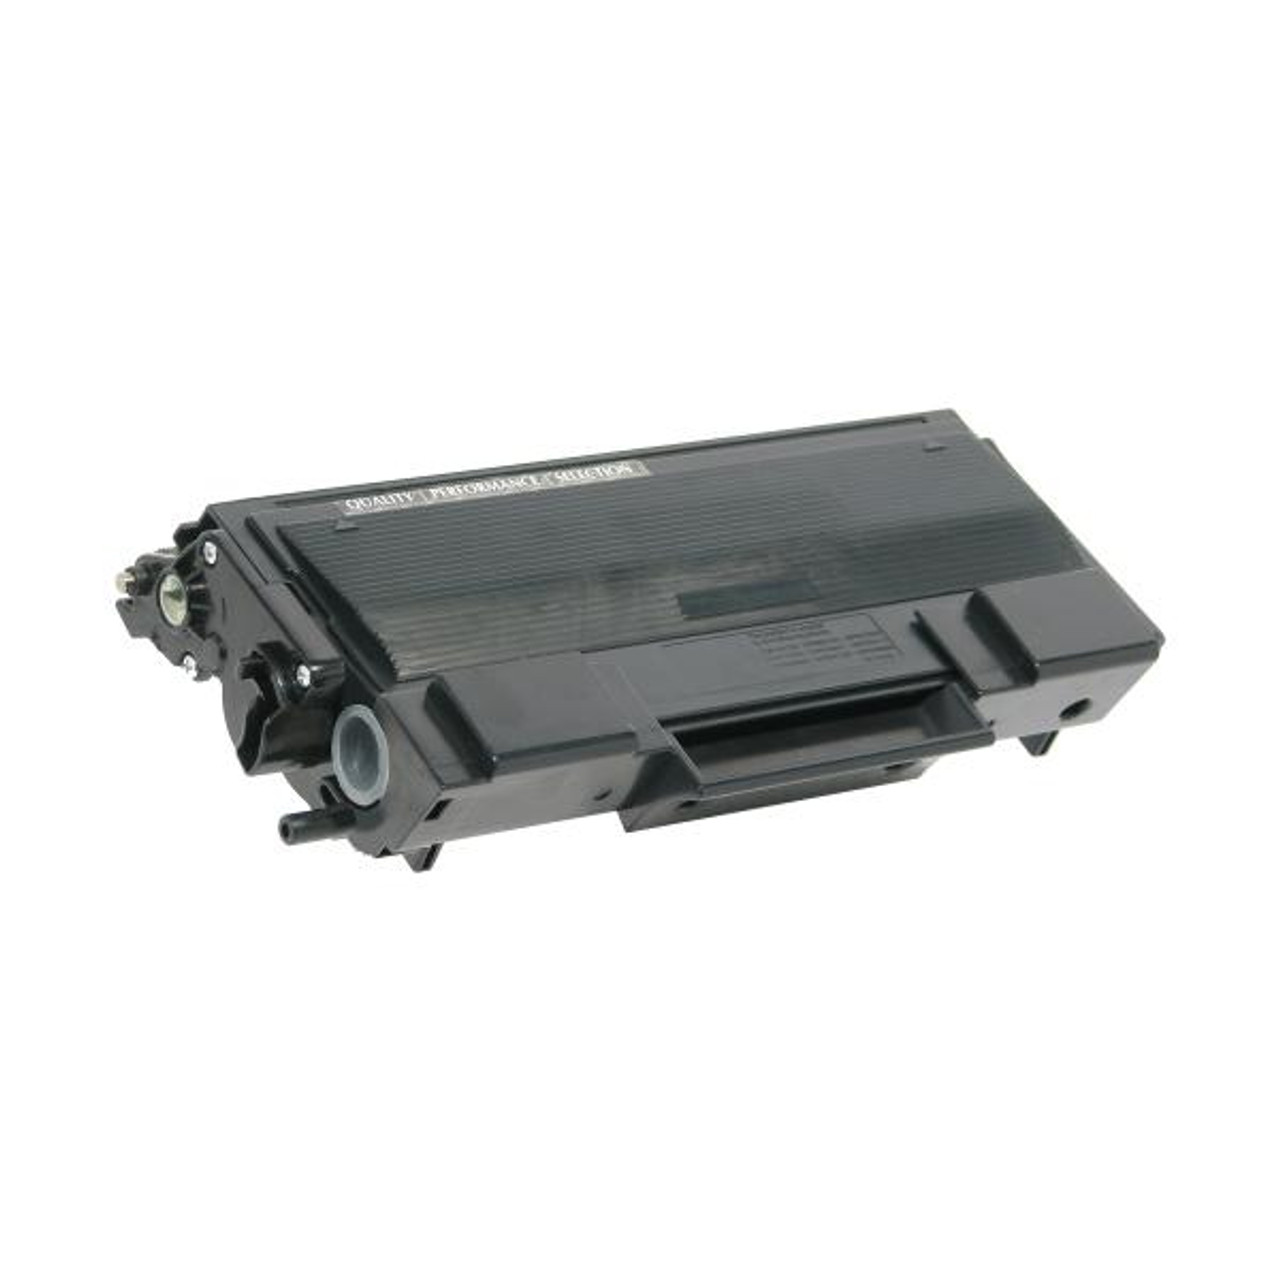 Toner Cartridge for Brother TN670-1